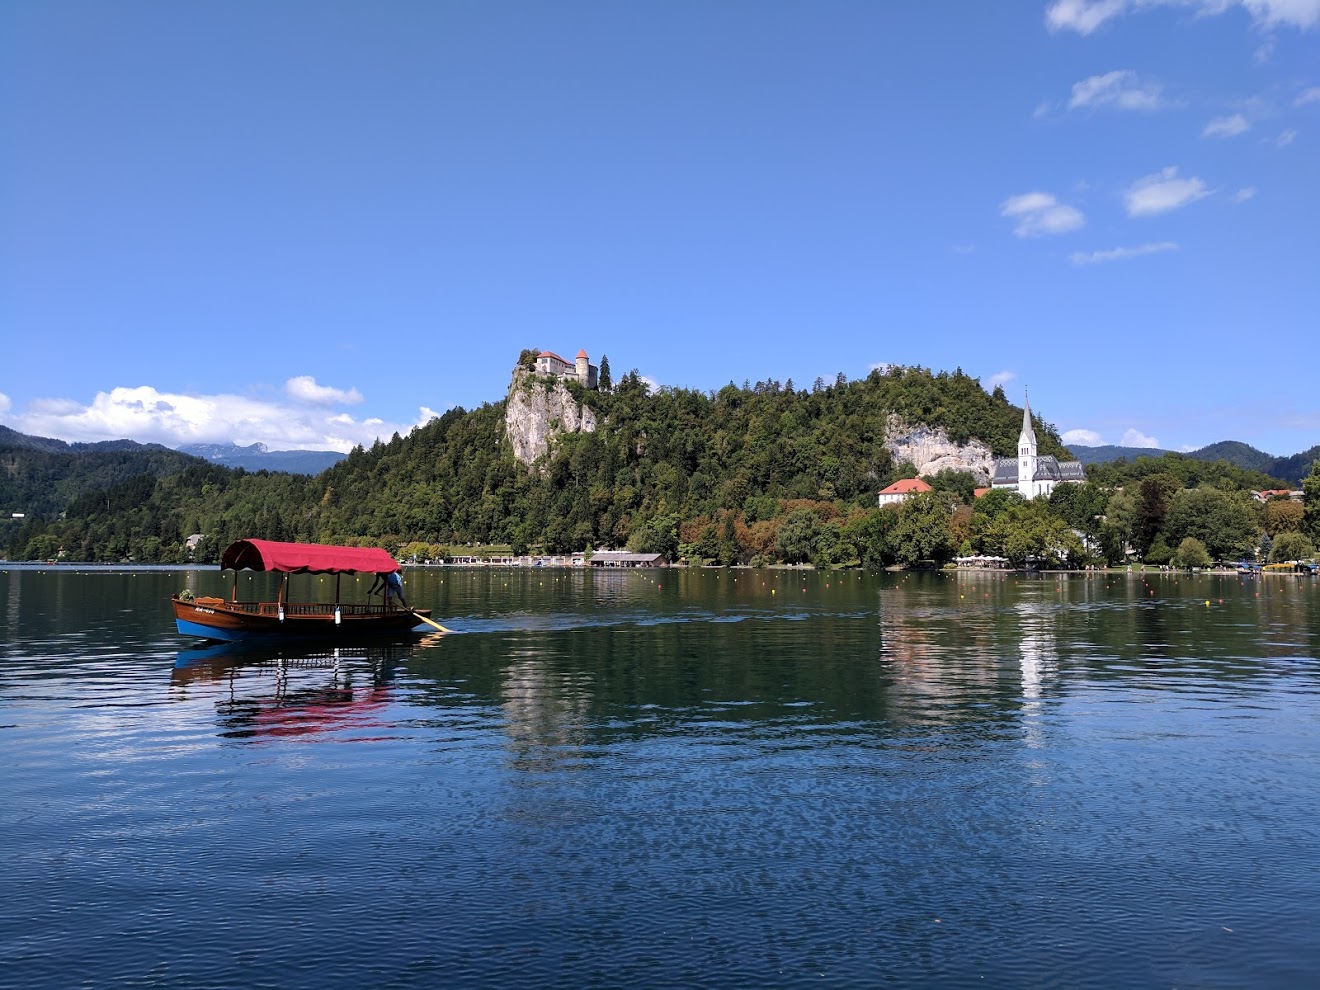 Lake Bled travel - Lonely Planet